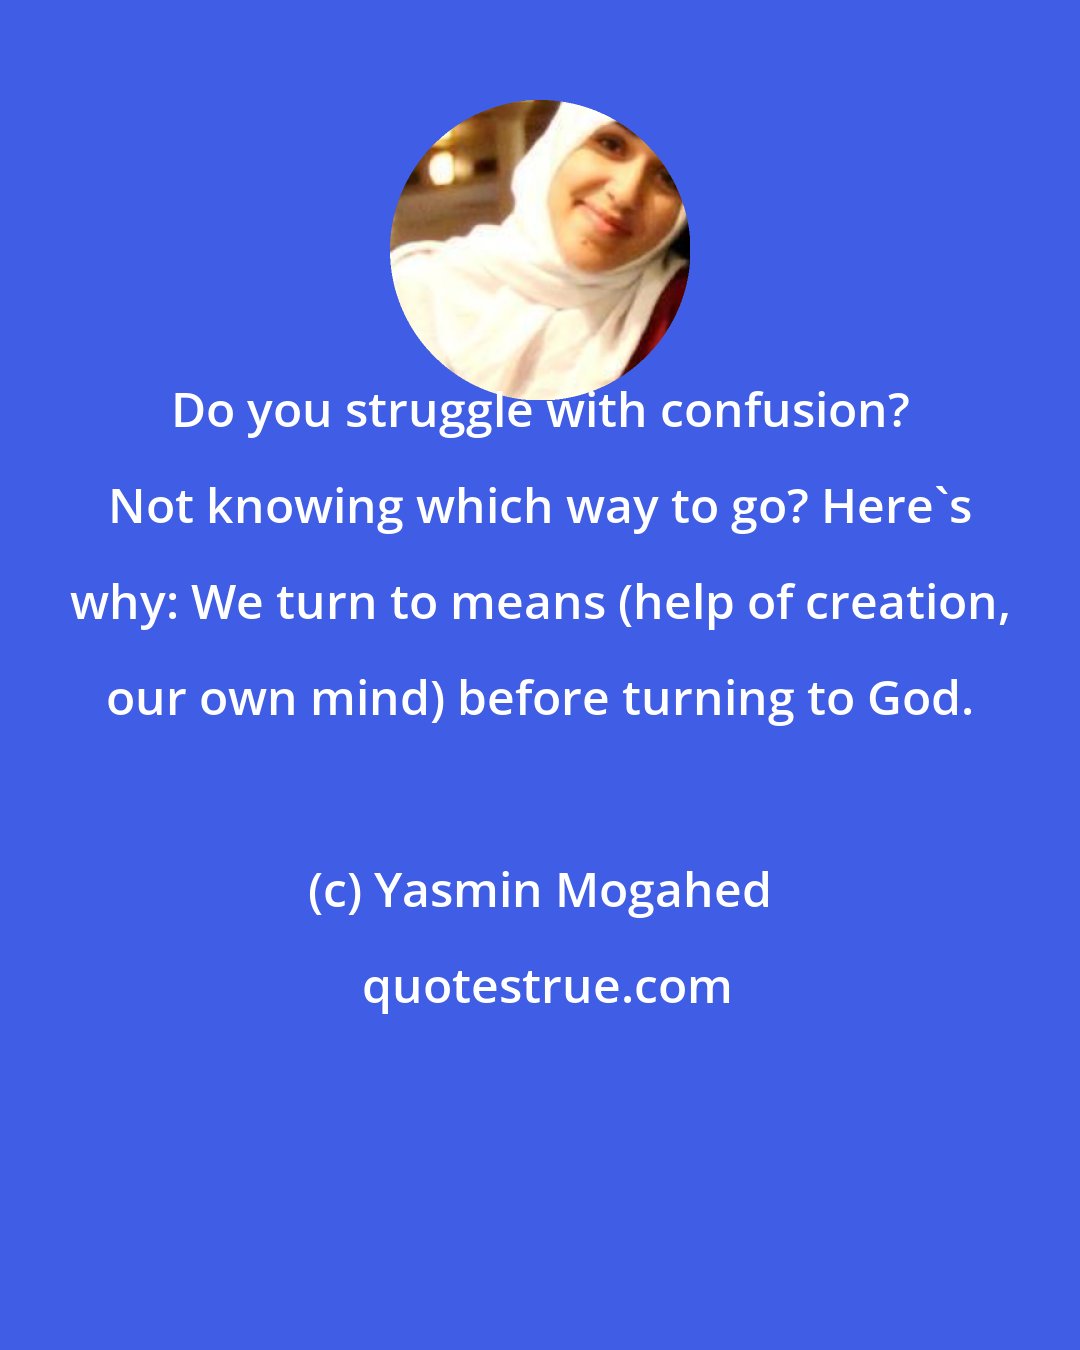 Yasmin Mogahed: Do you struggle with confusion? Not knowing which way to go? Here's why: We turn to means (help of creation, our own mind) before turning to God.